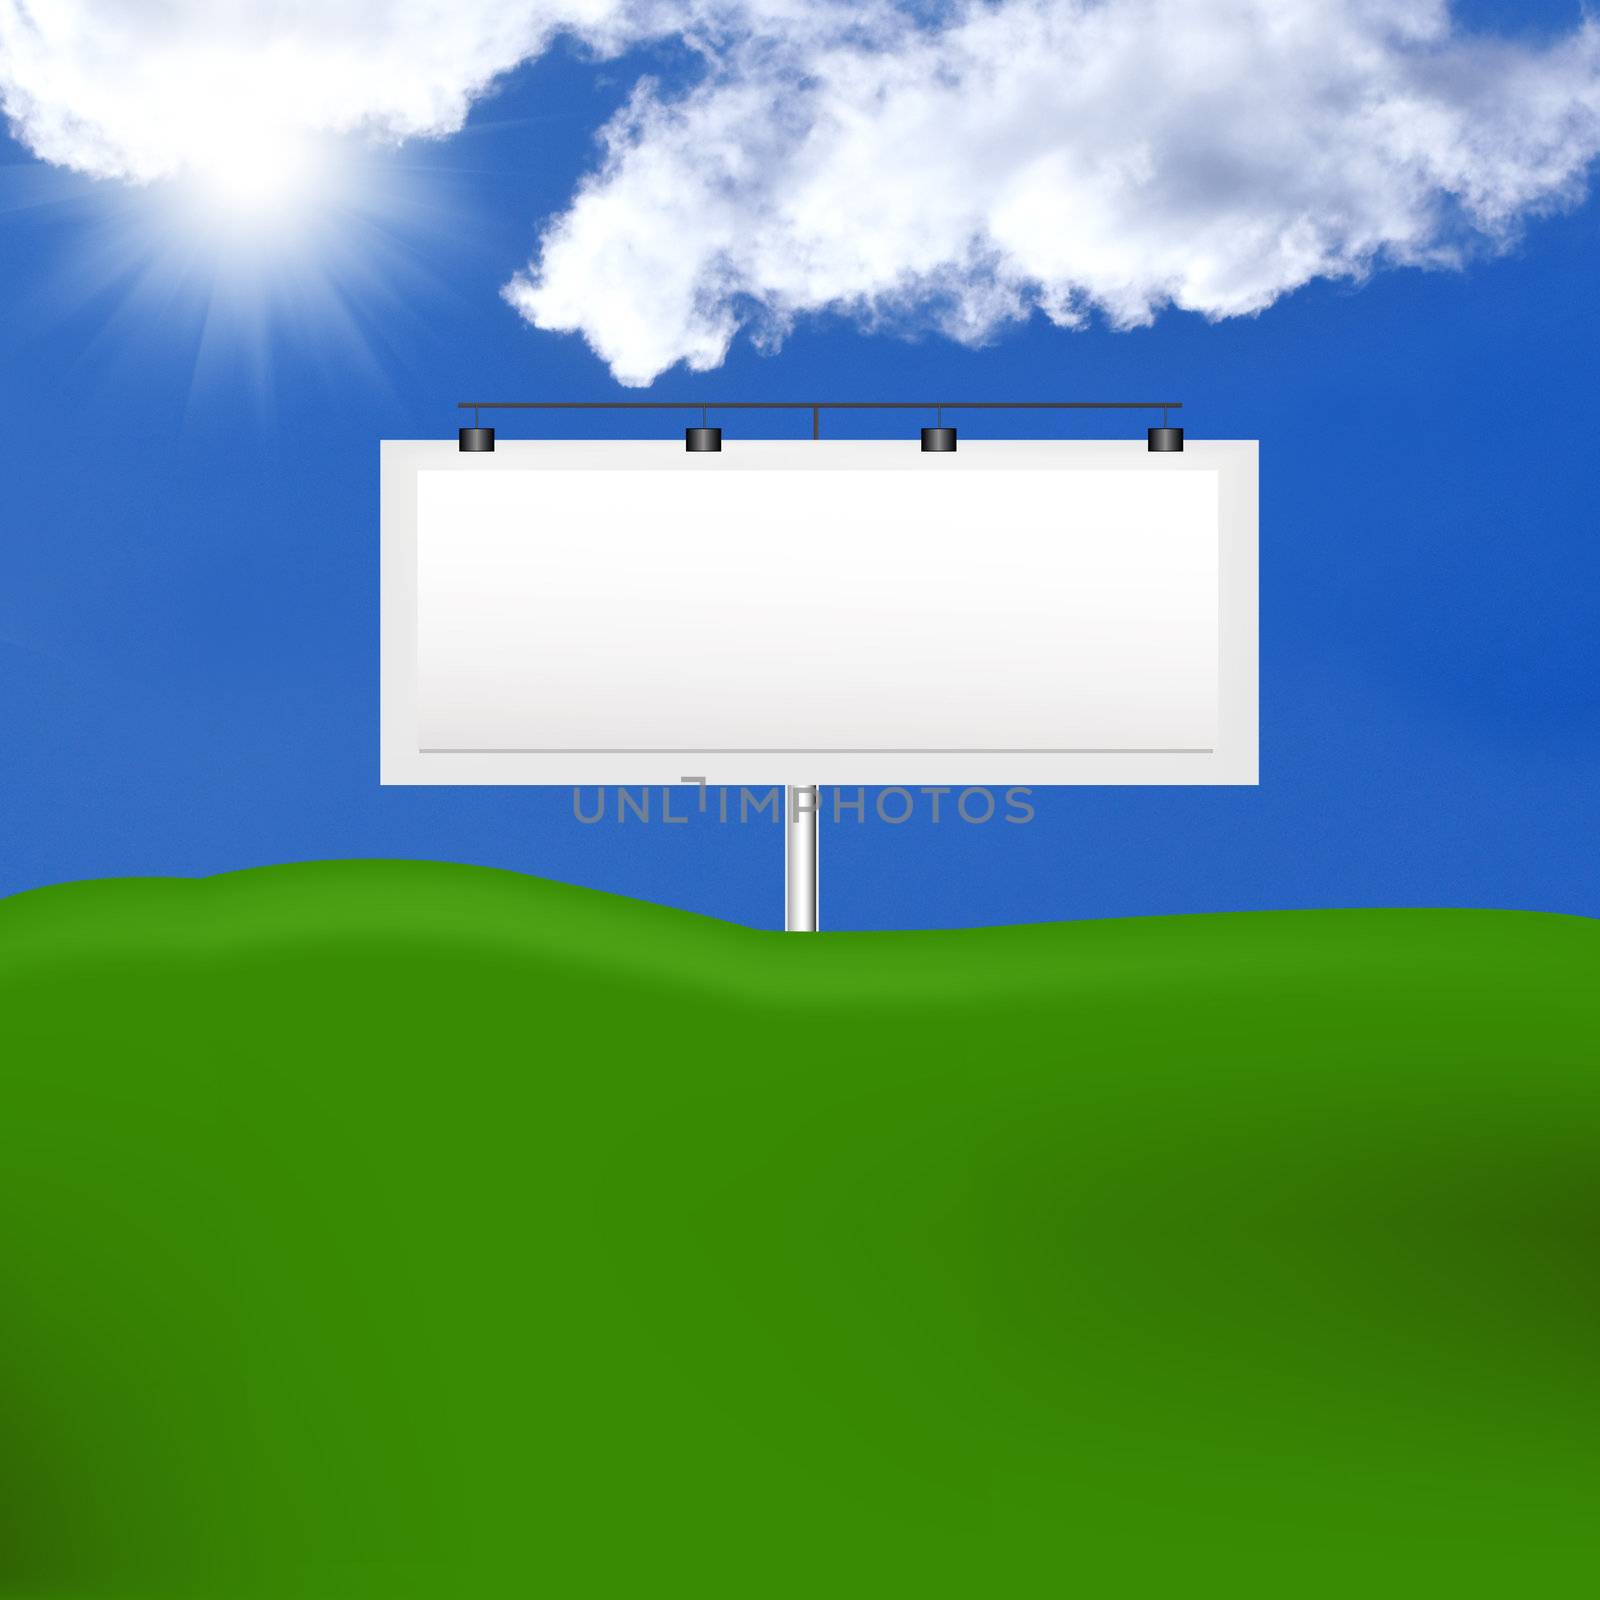 Publicity board against the bright blue cloudy sky and greenfield